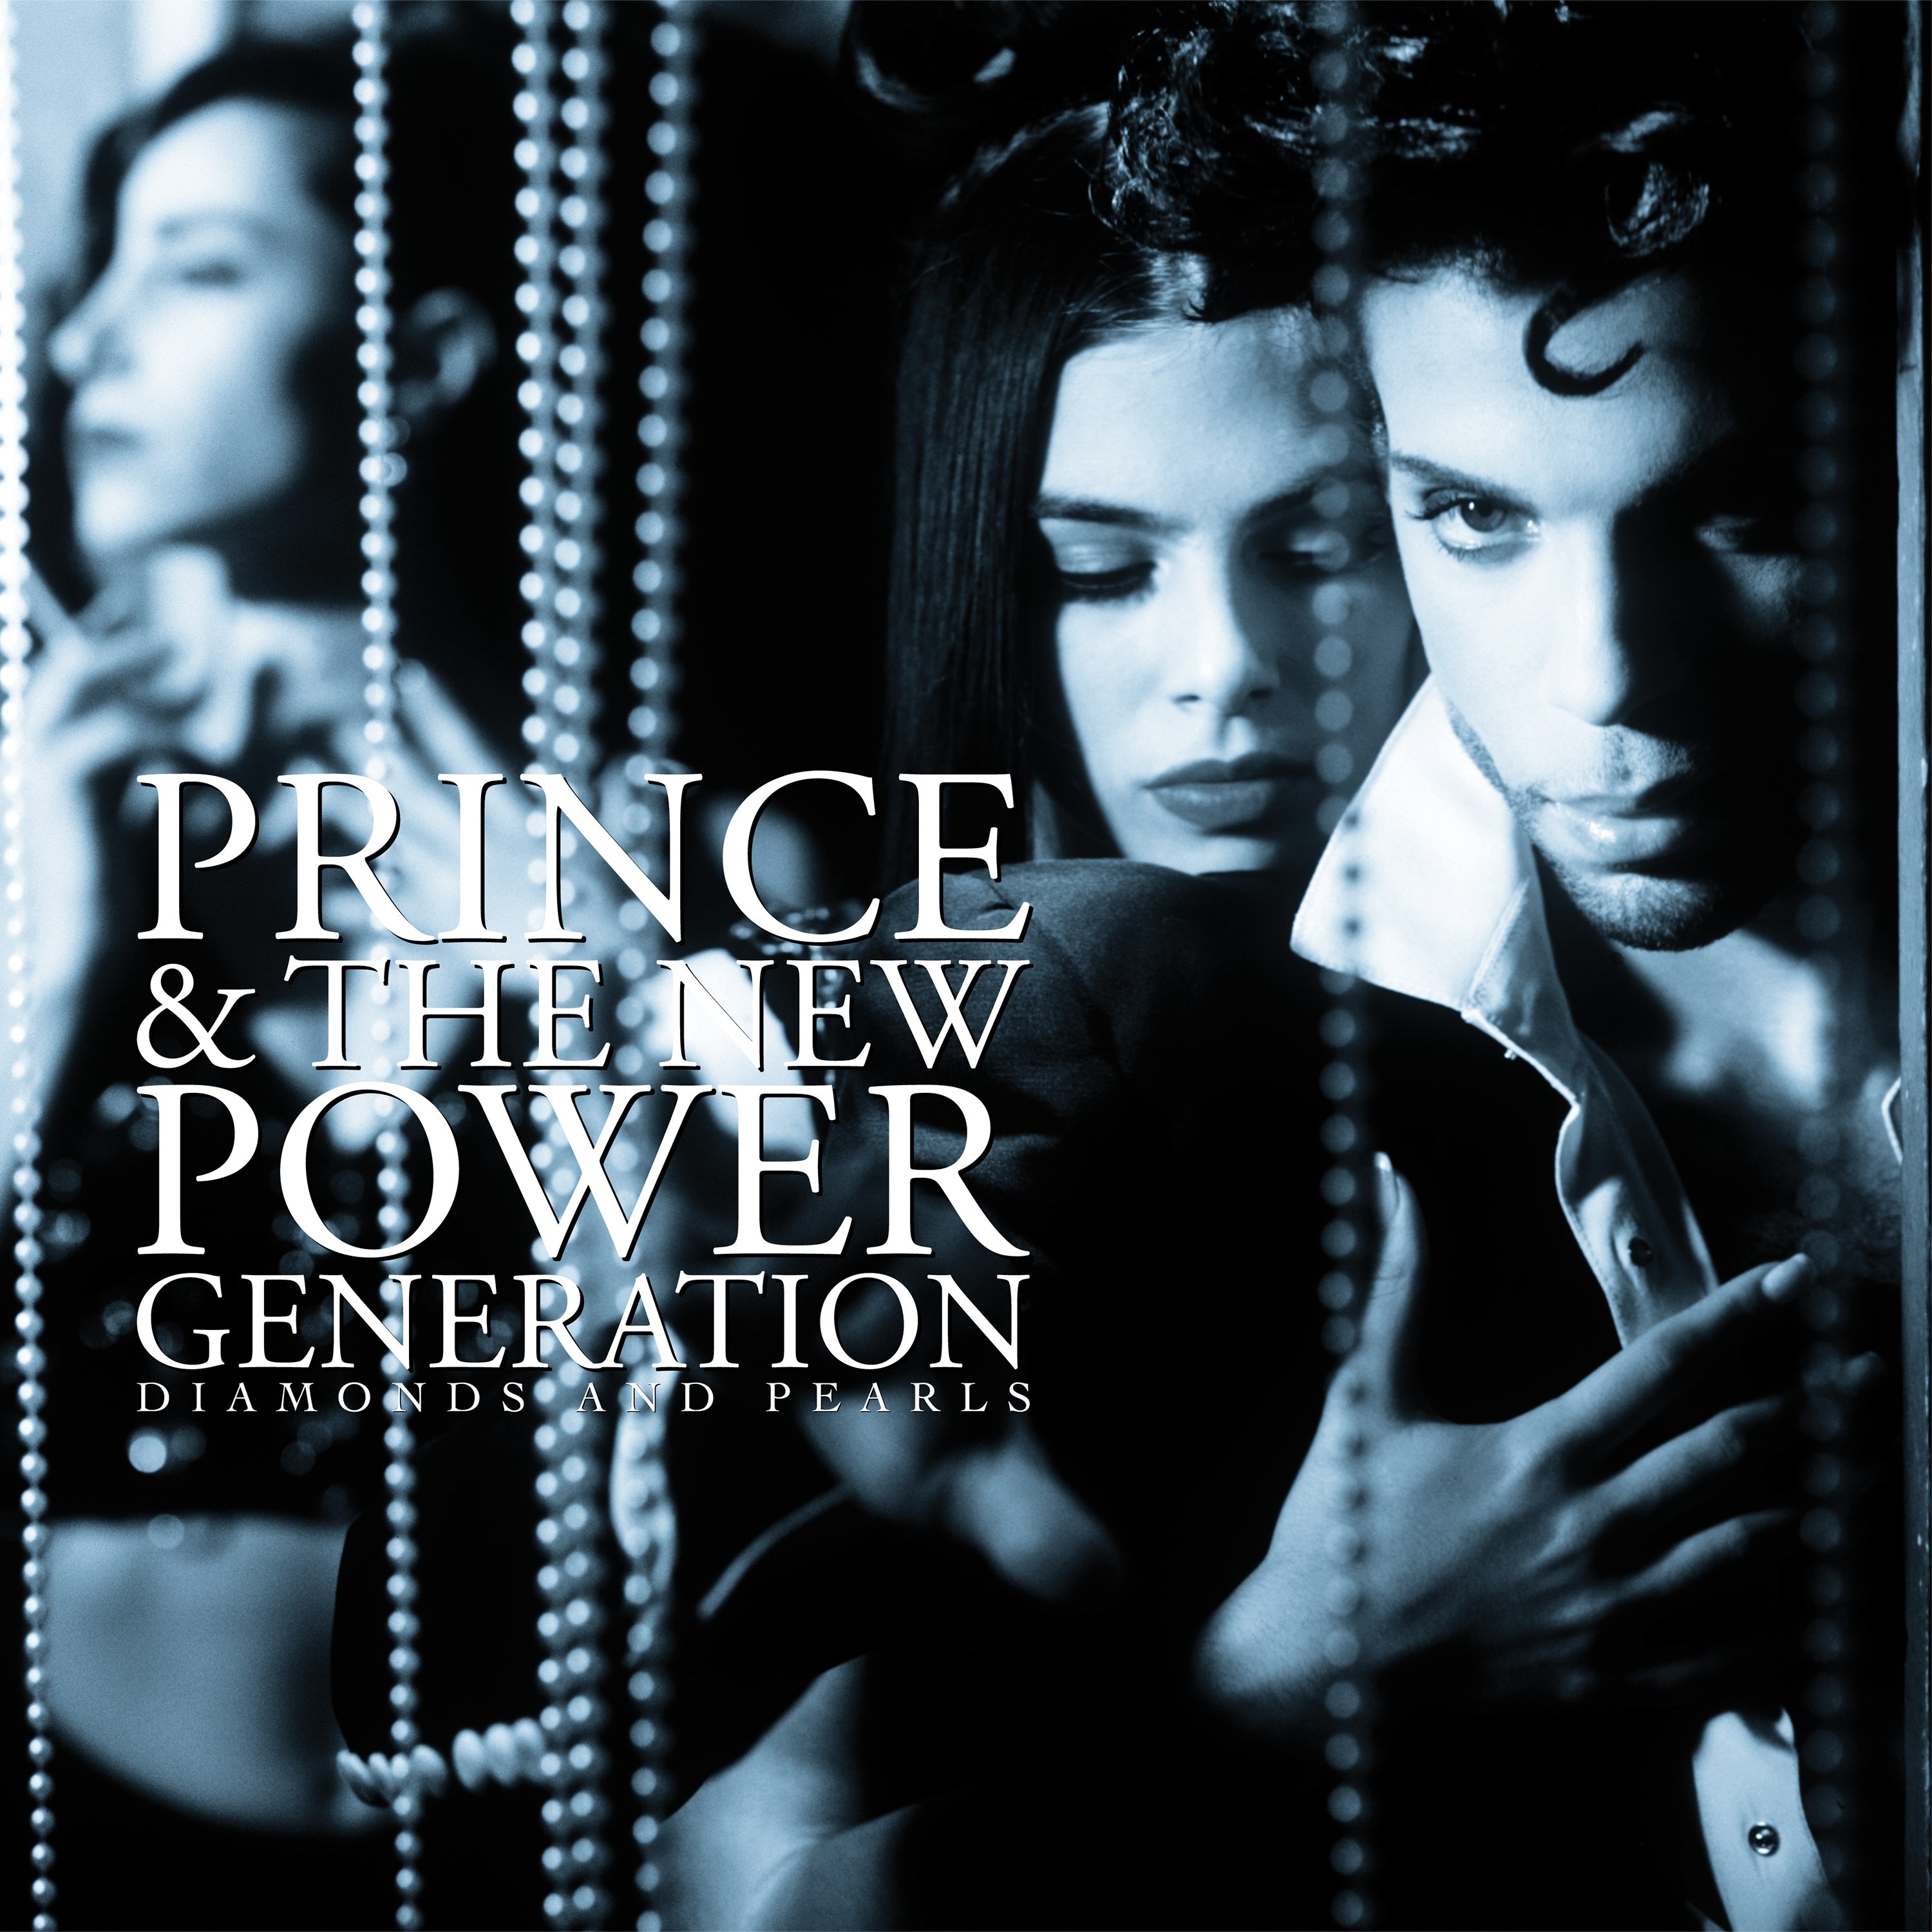 Prince & The New Power Generation | Diamonds and Pearls Deluxe Edition | CD - 0